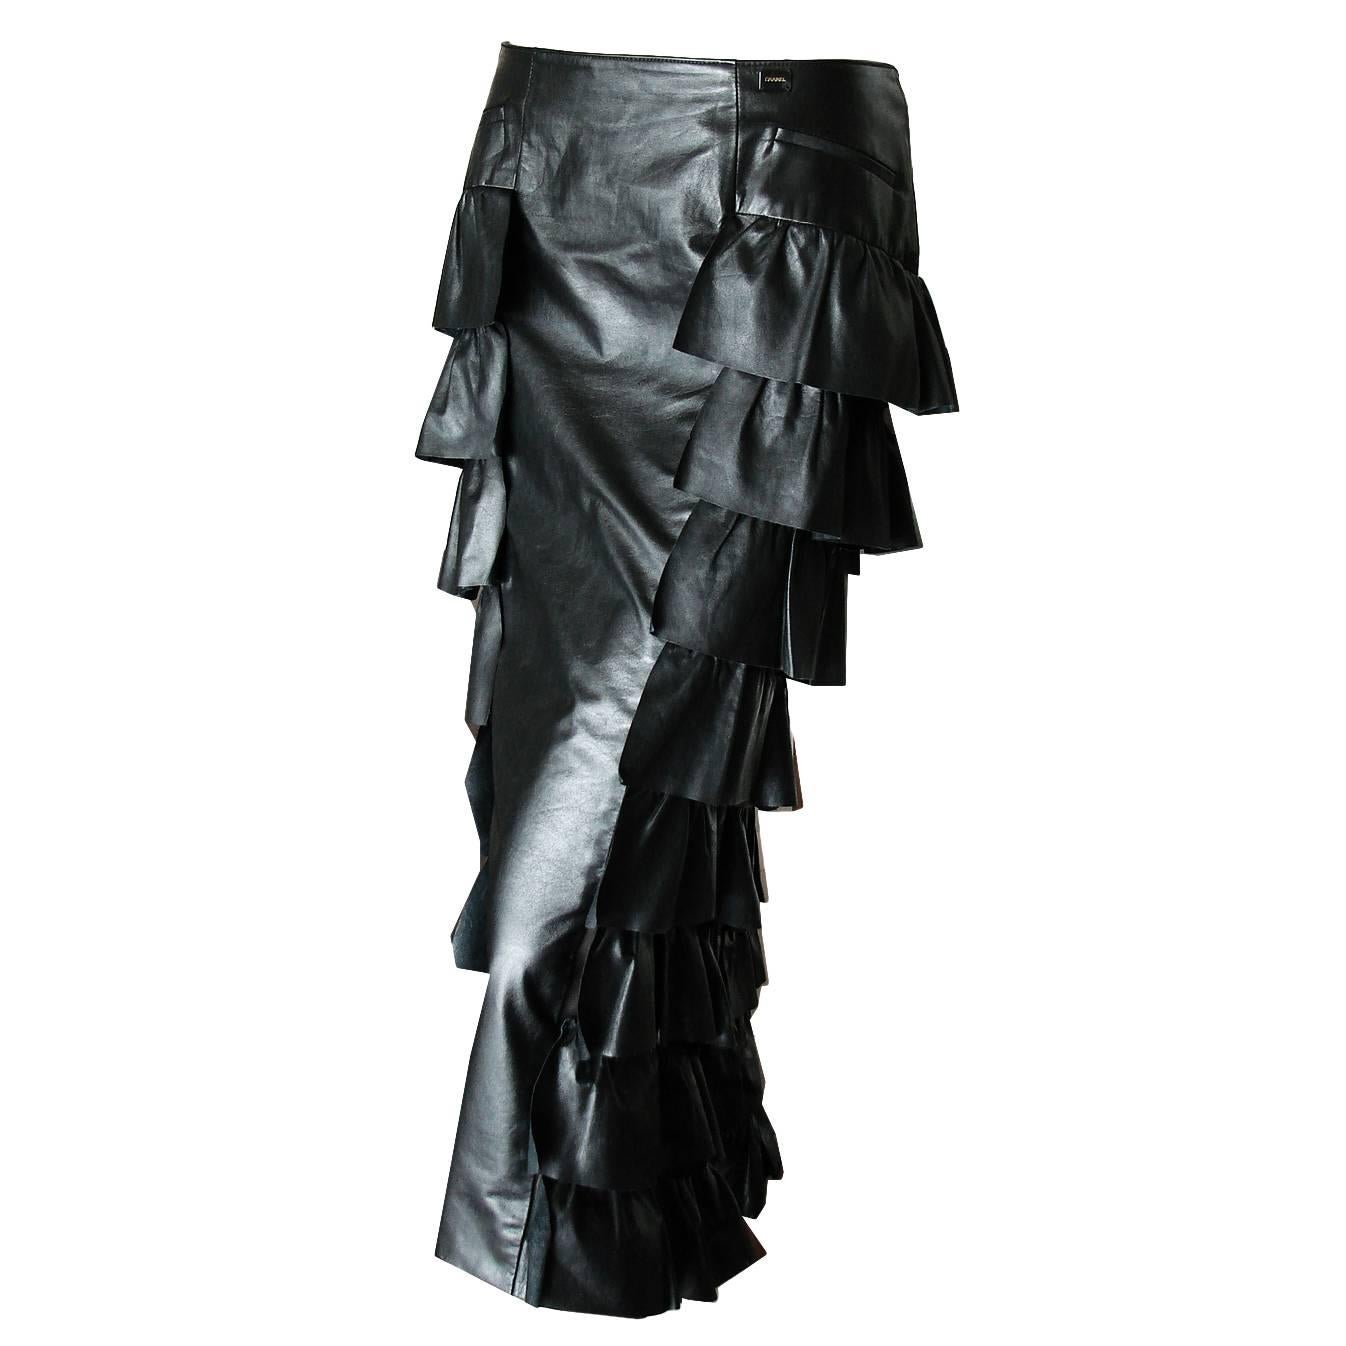 Chanel Black Leather & Sheer Panel Ruffled Maxi Skirt Fall 01A Size 40 